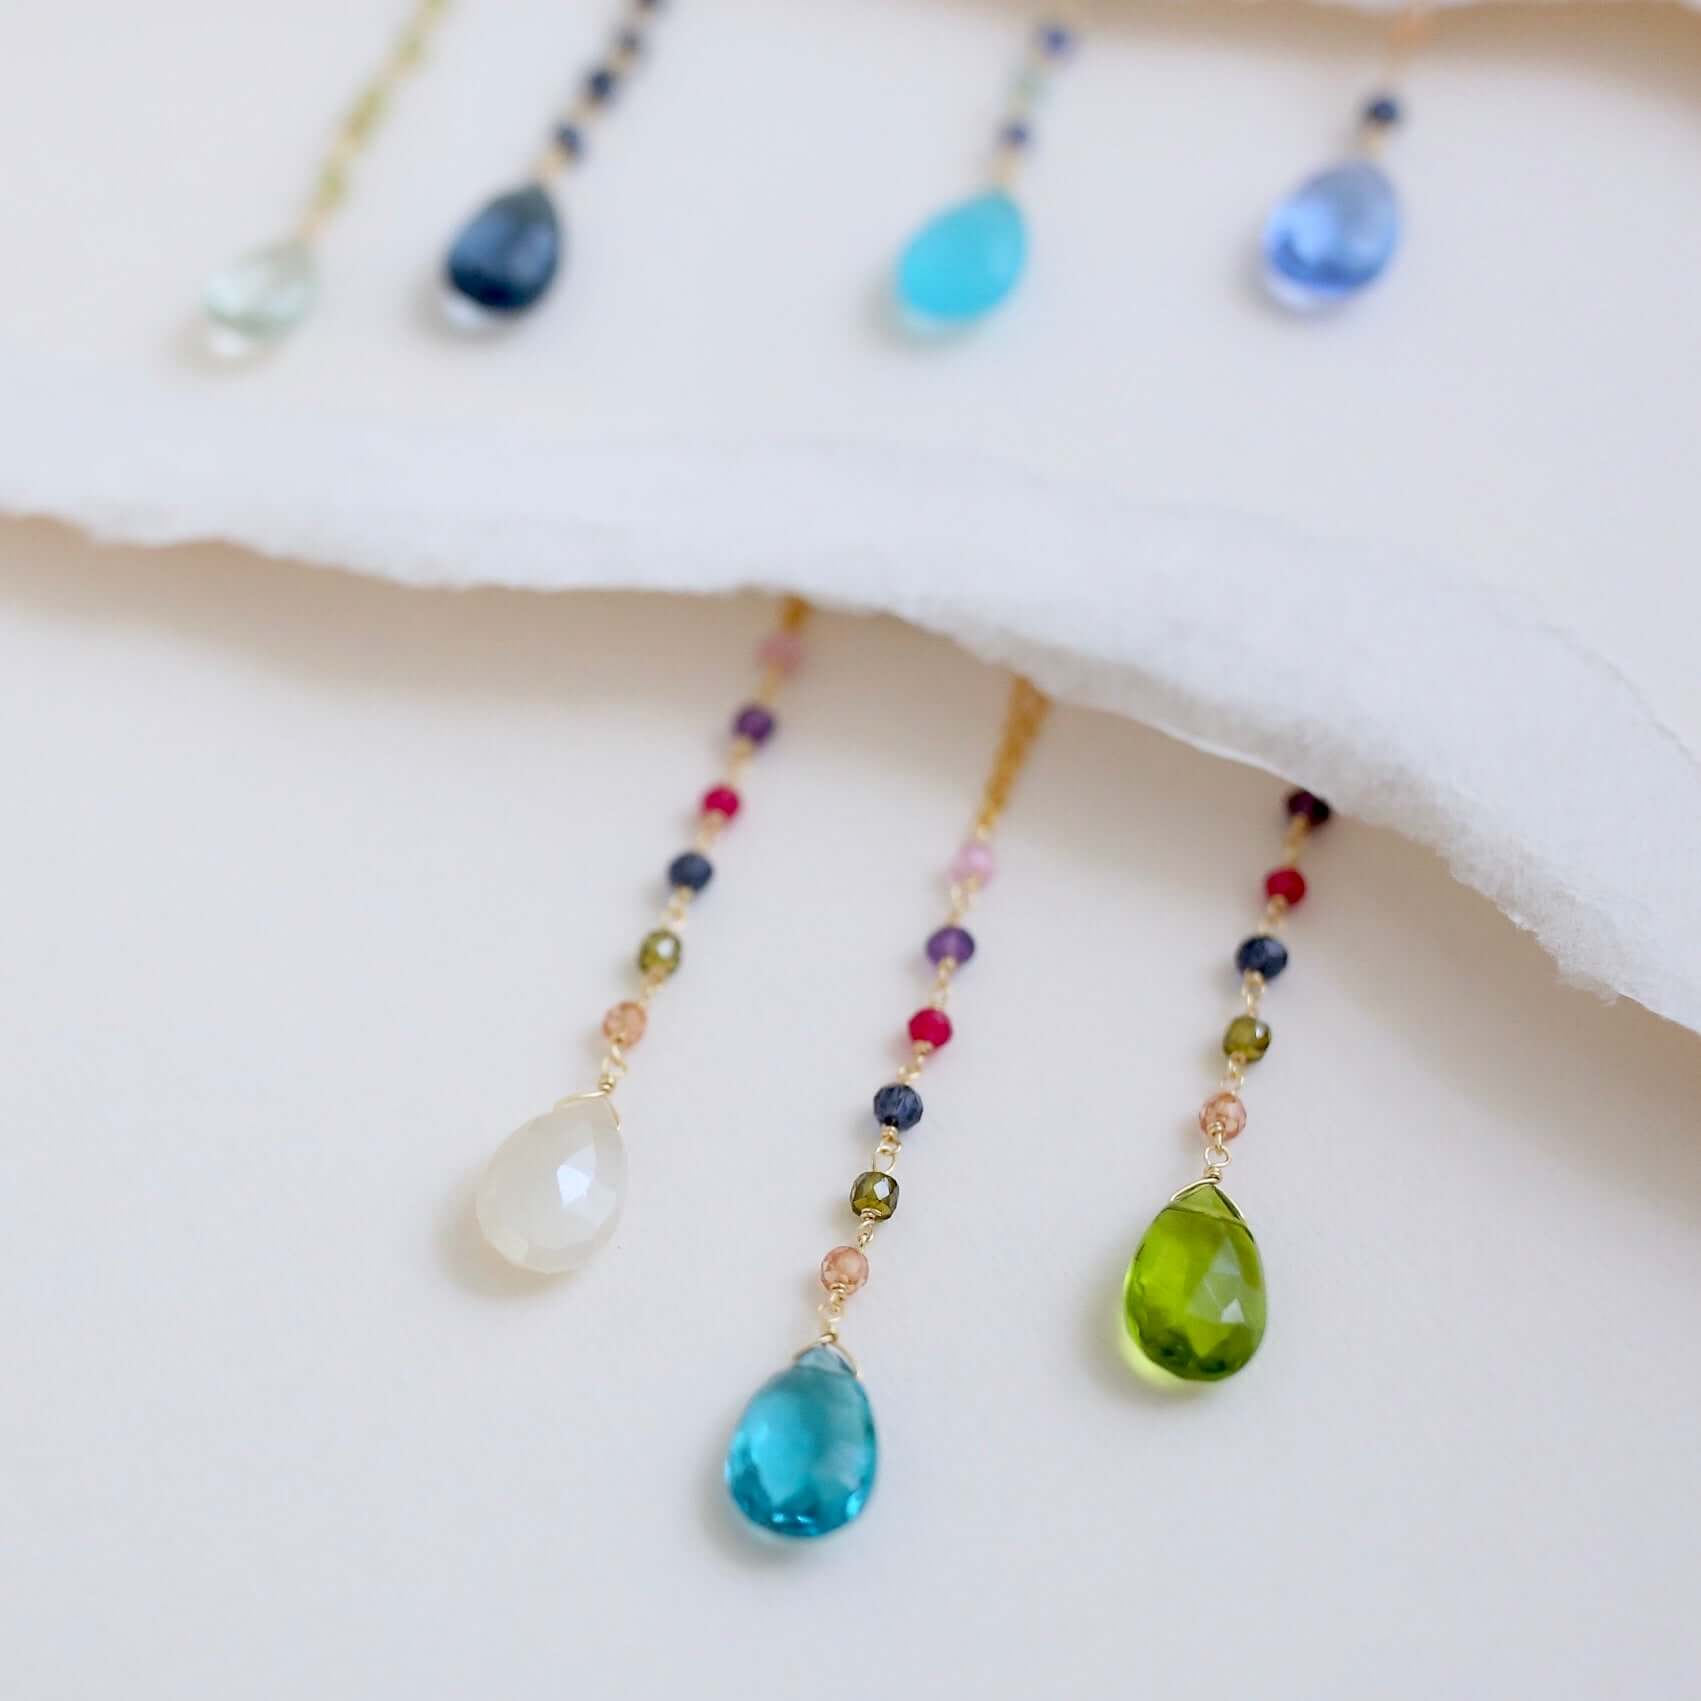 Colorful Yoga Pendant Necklaces with 2-Inch Drop in Gleaming Gold